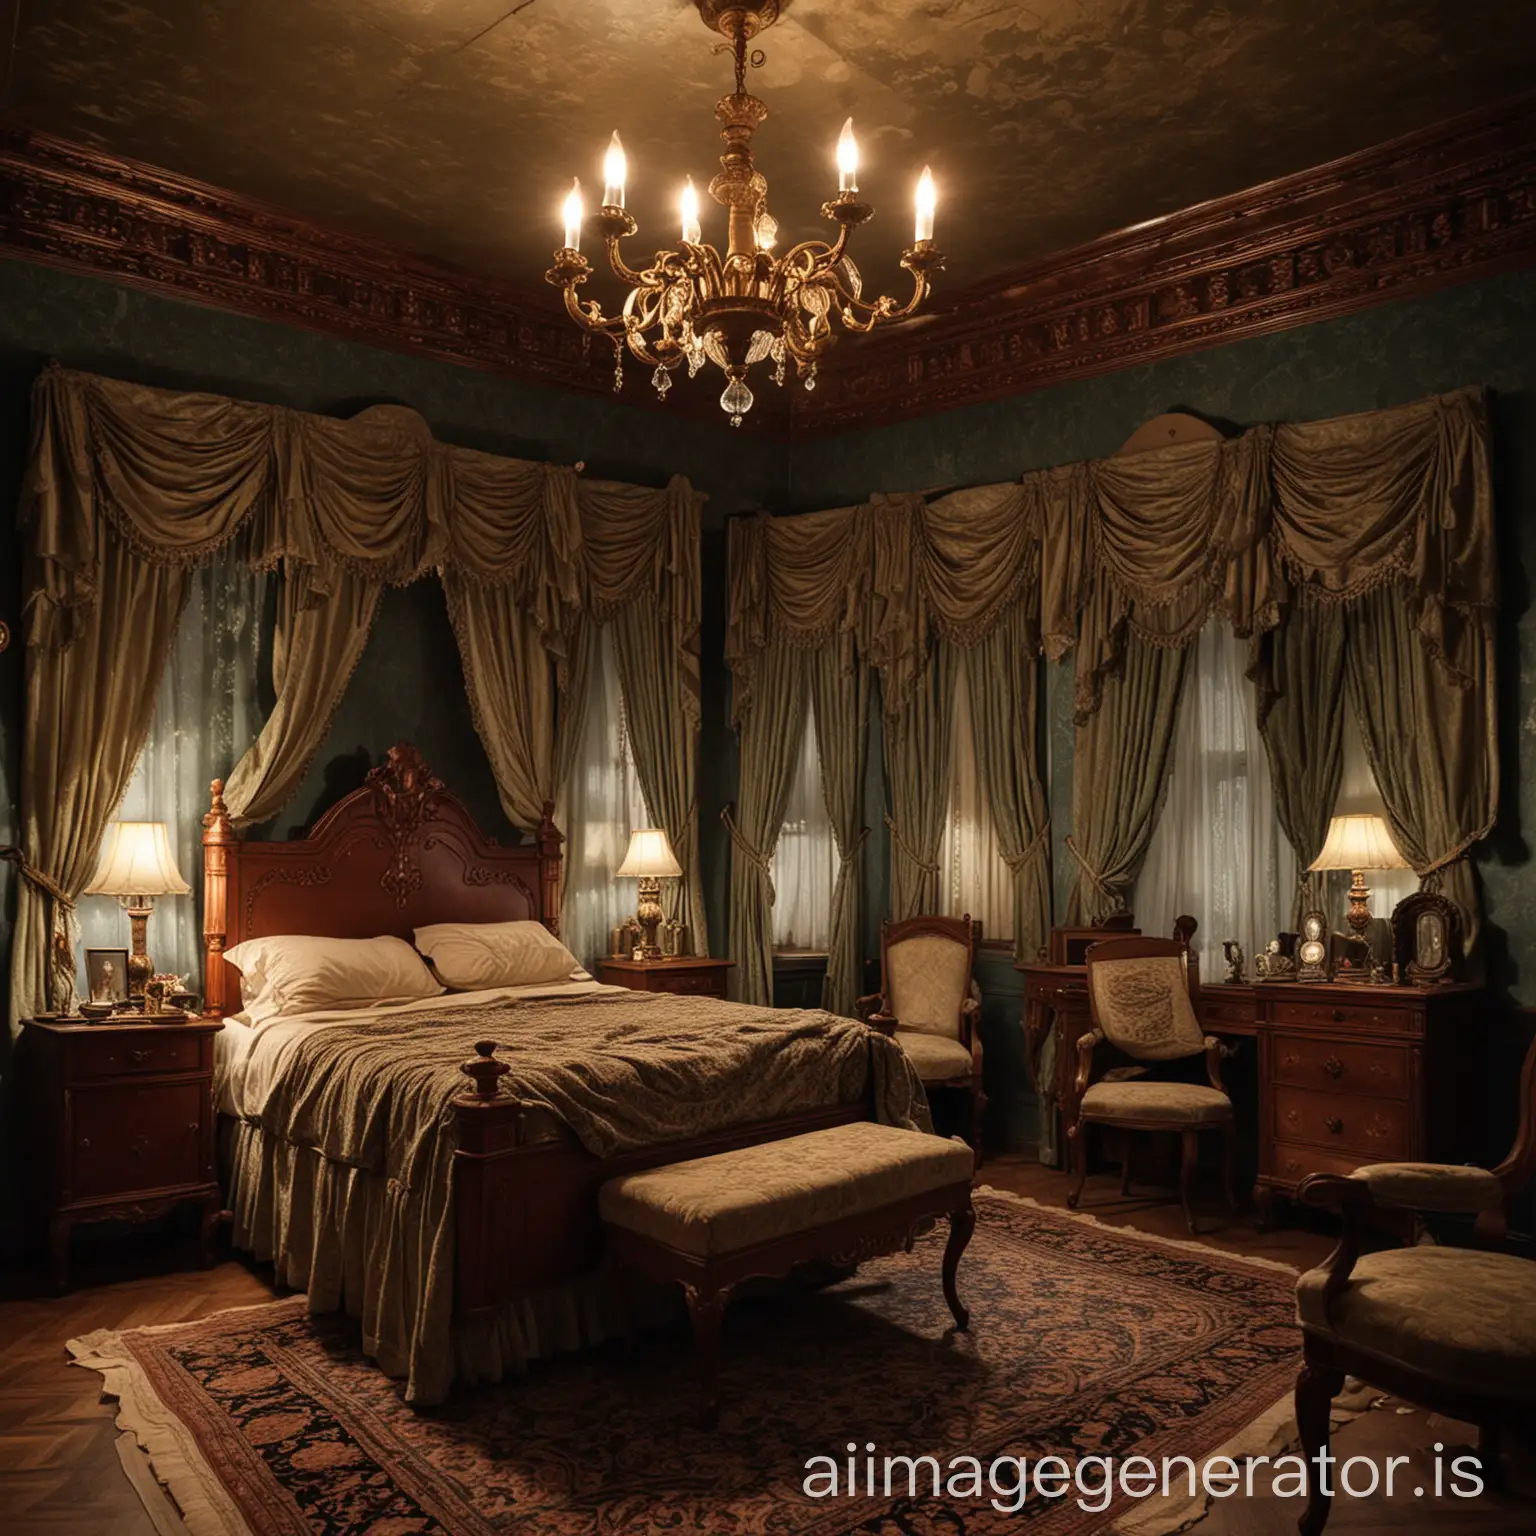 Victorian-Era-Bedroom-at-Night-with-Antique-Furnishings-and-Dim-Candlelight